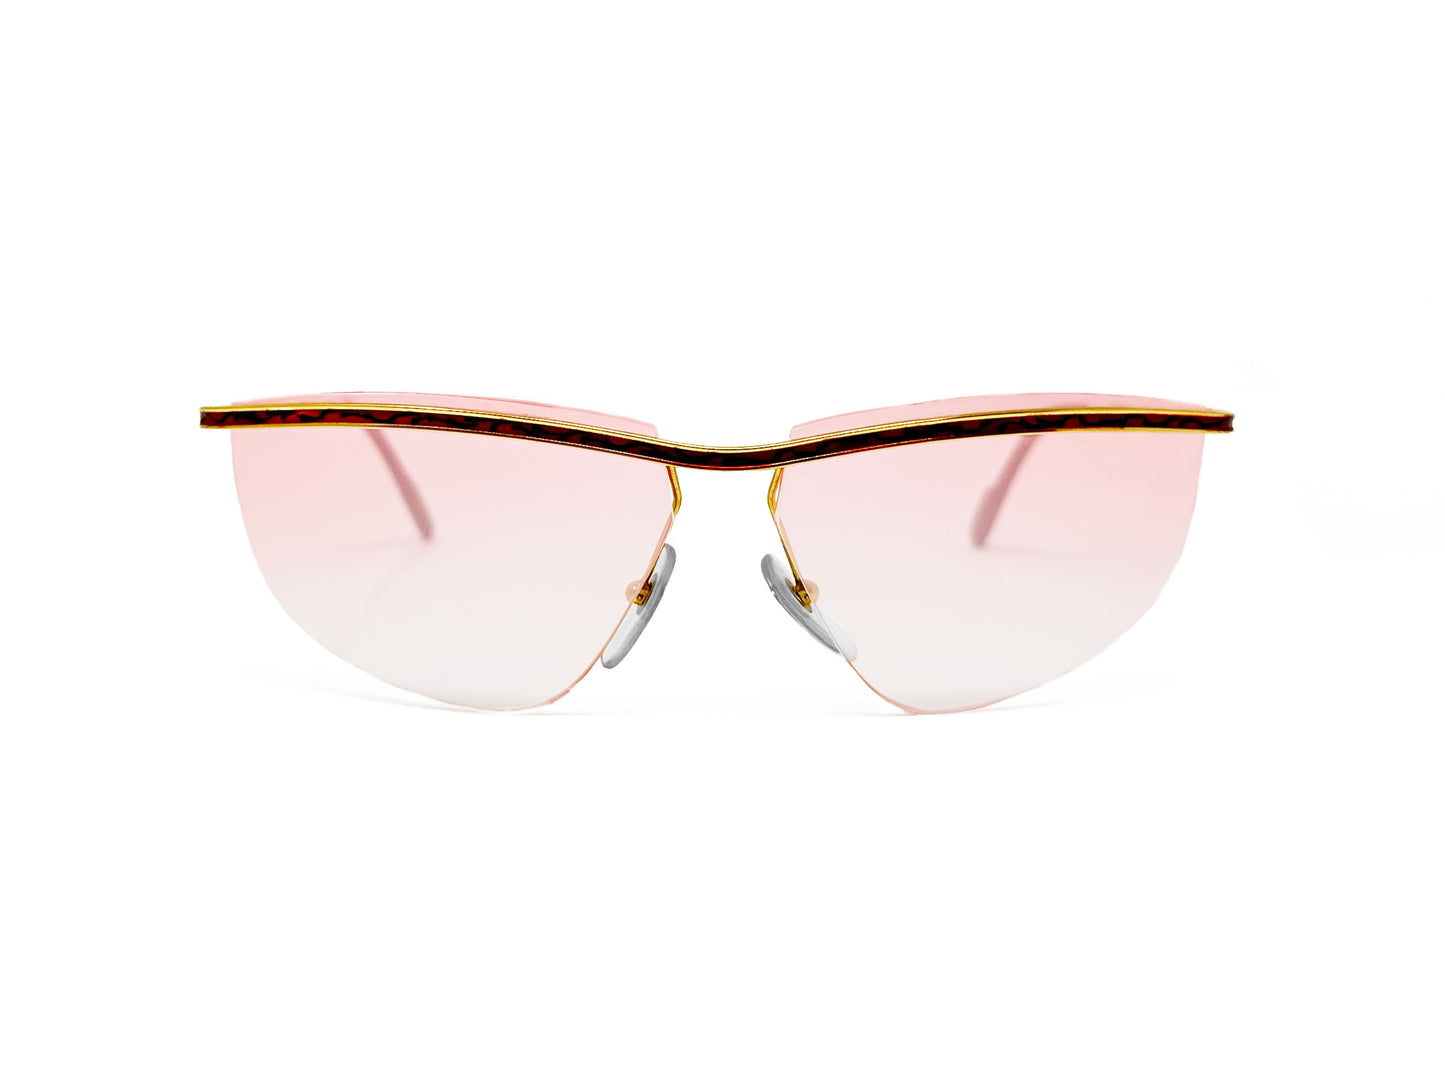 Lozza metal rimless optical frame with bar across front of frame. Model: 5504. Color: 1 - Red marble with gold. front view. 